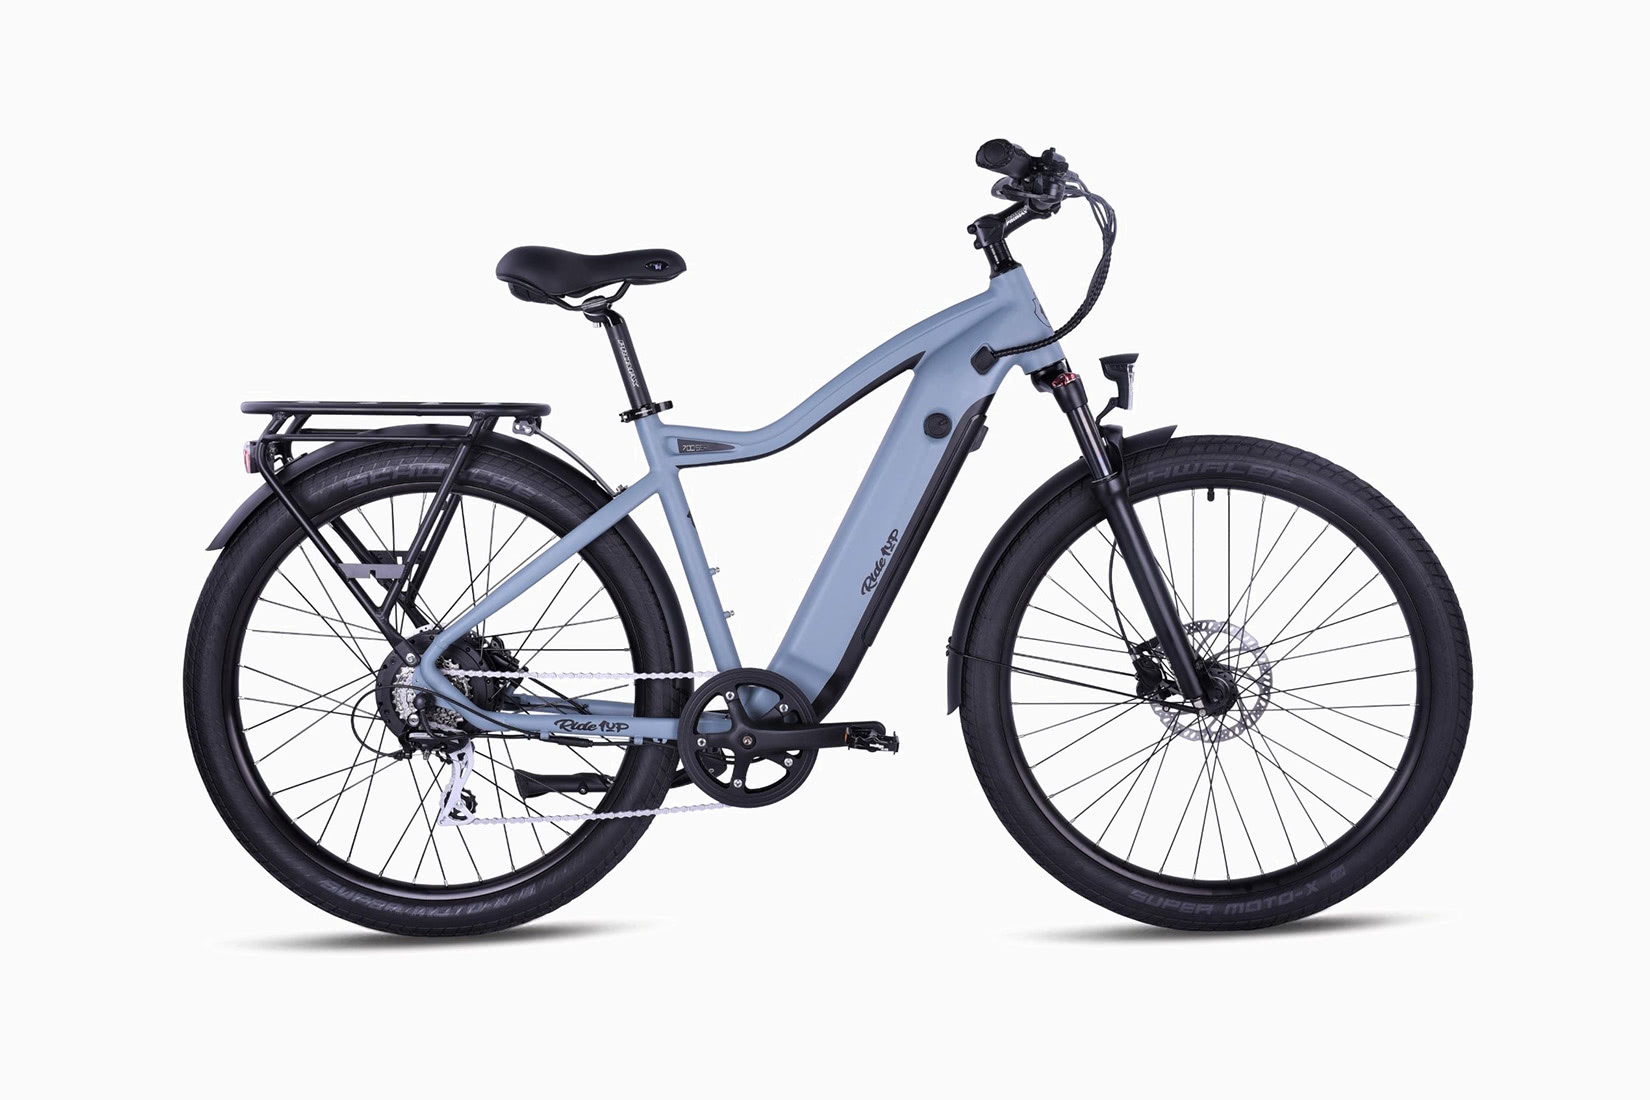 ride1up 700 series review electric all-terrain ebike luxe digital